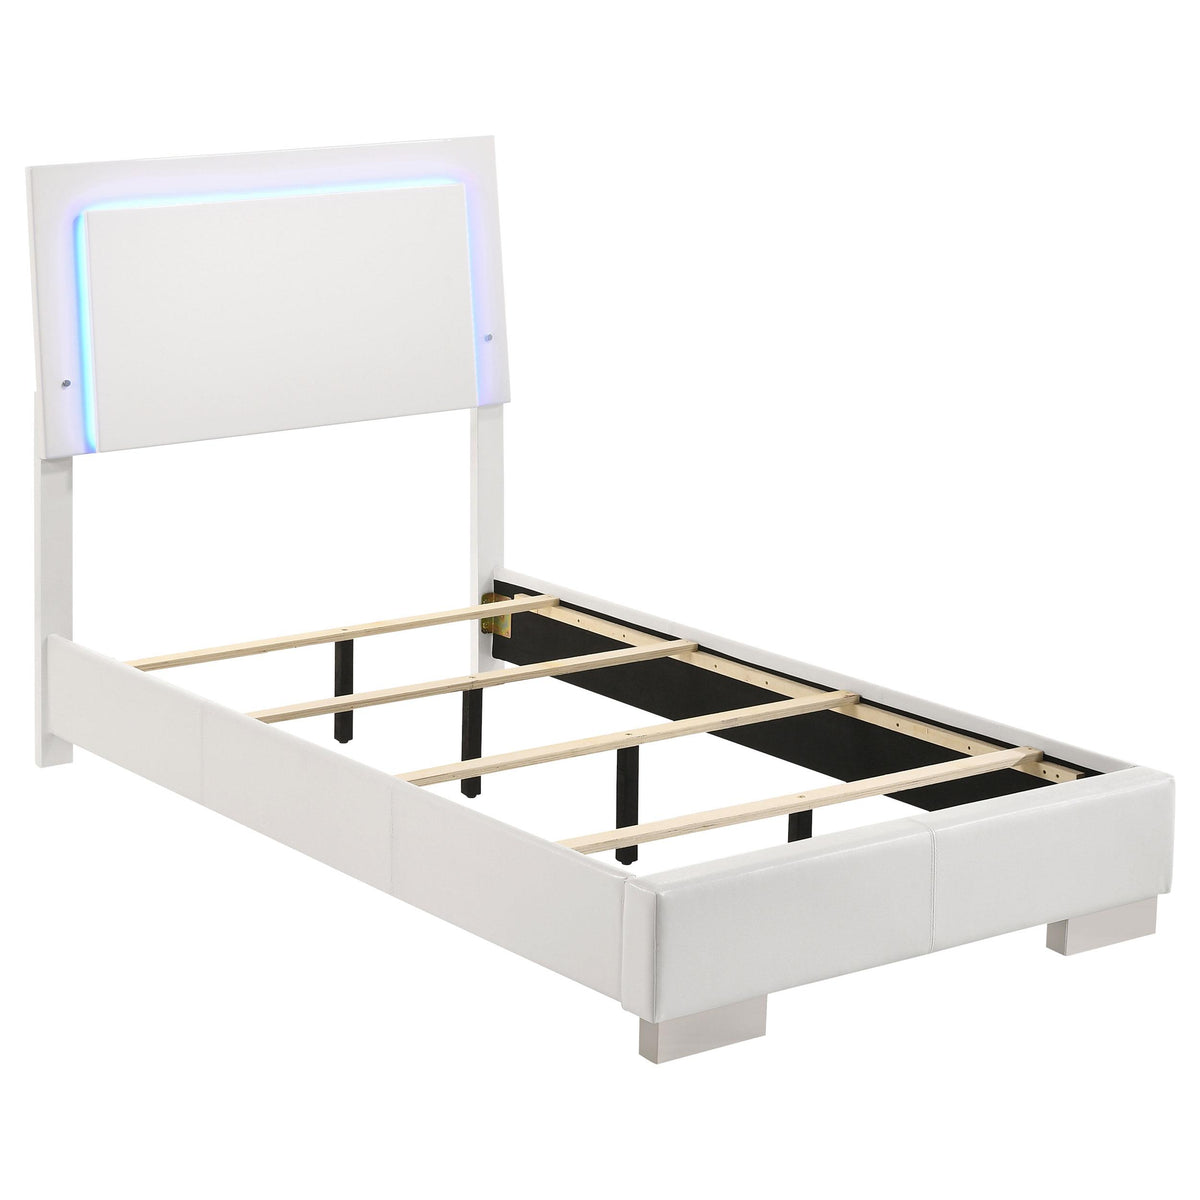 Felicity Twin Panel Bed with LED Lighting Glossy White Felicity Twin Panel Bed with LED Lighting Glossy White Half Price Furniture